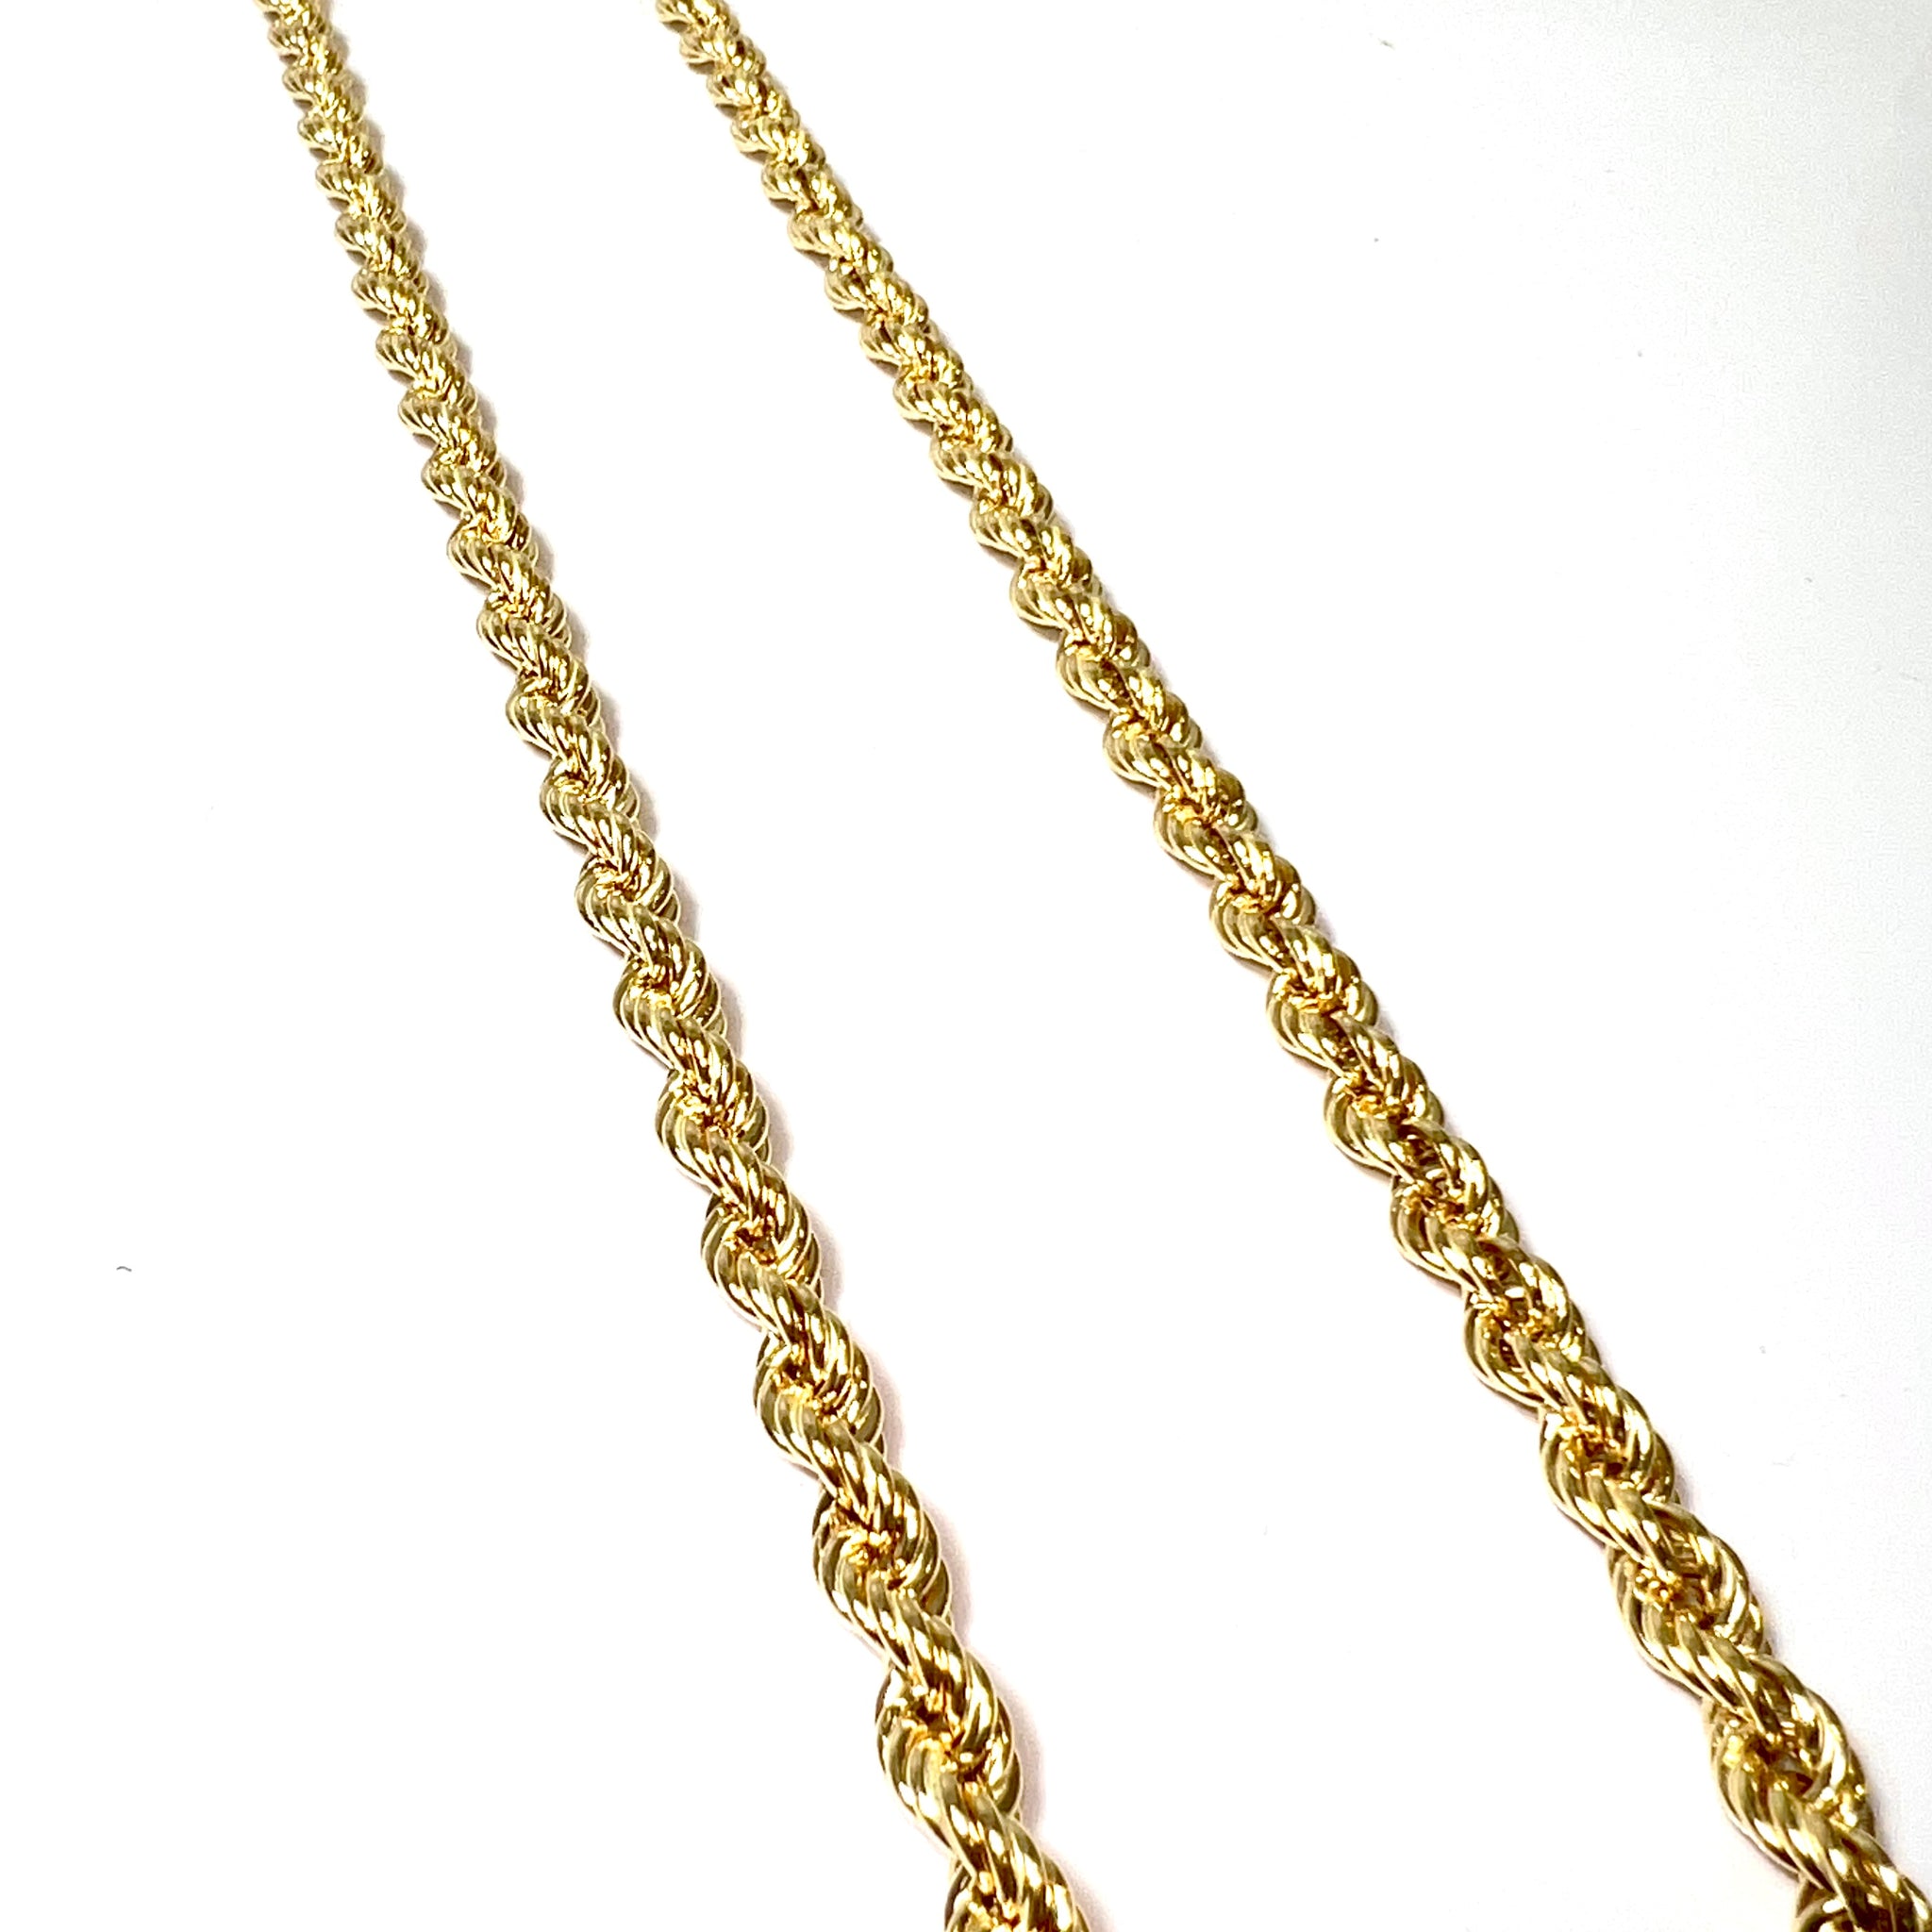 Rope Chain - 18 Carat Gold - 65cm / 6,5mm- 413